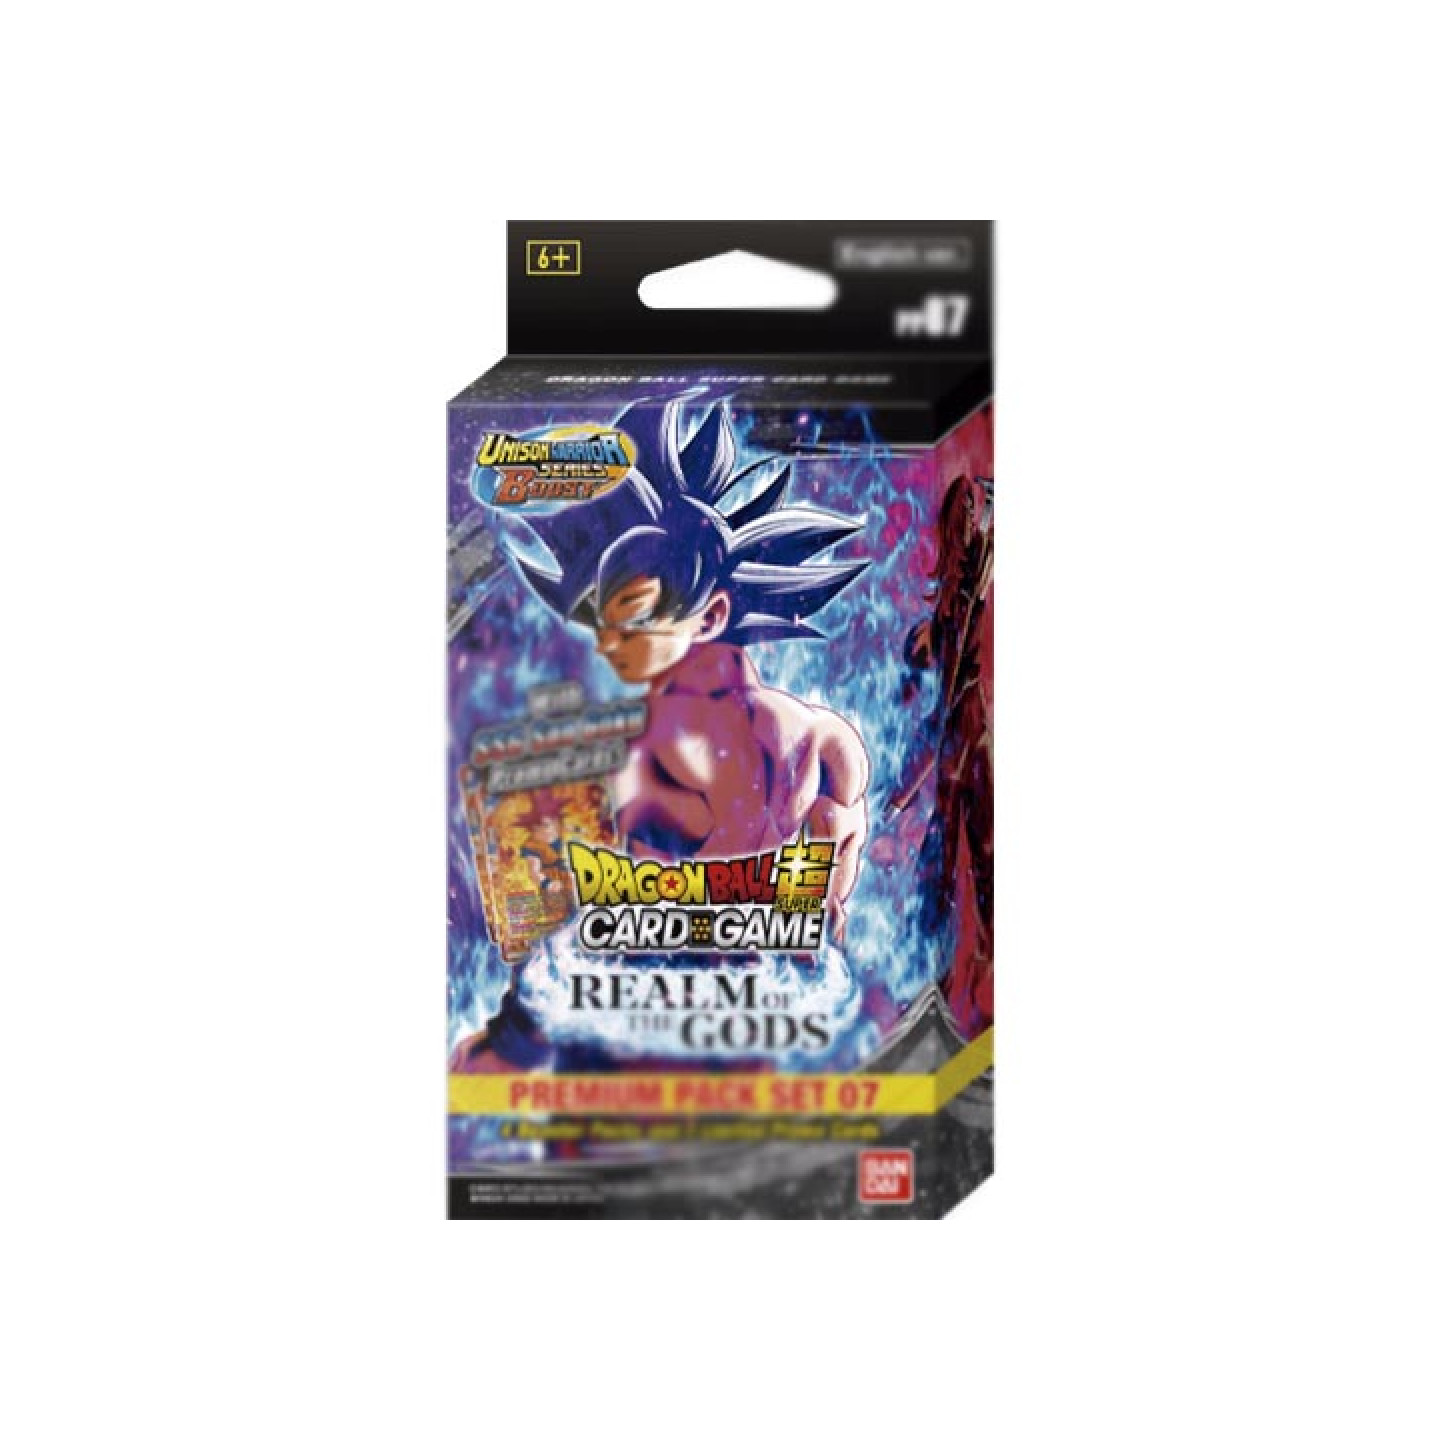 premium-pack-set-07-realm-of-the-gods-dragon-ball-super-card-game